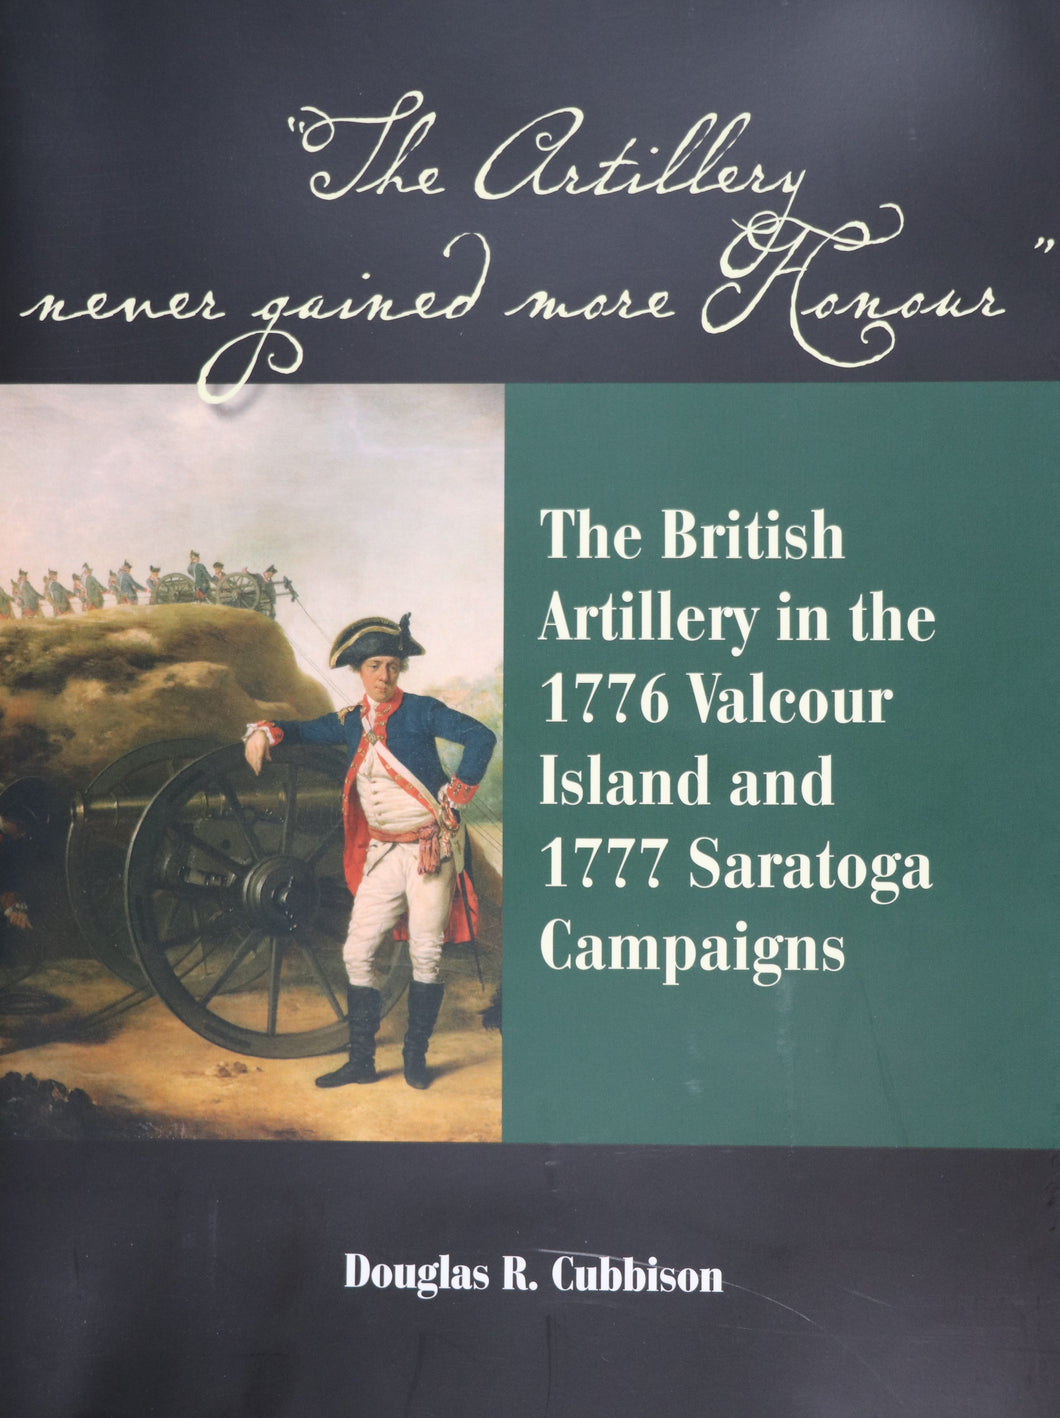 The Artillery Never Gained More Honour: The British Artillery in the 1776 Valcour Island and 1777 Saratoga Campaigns